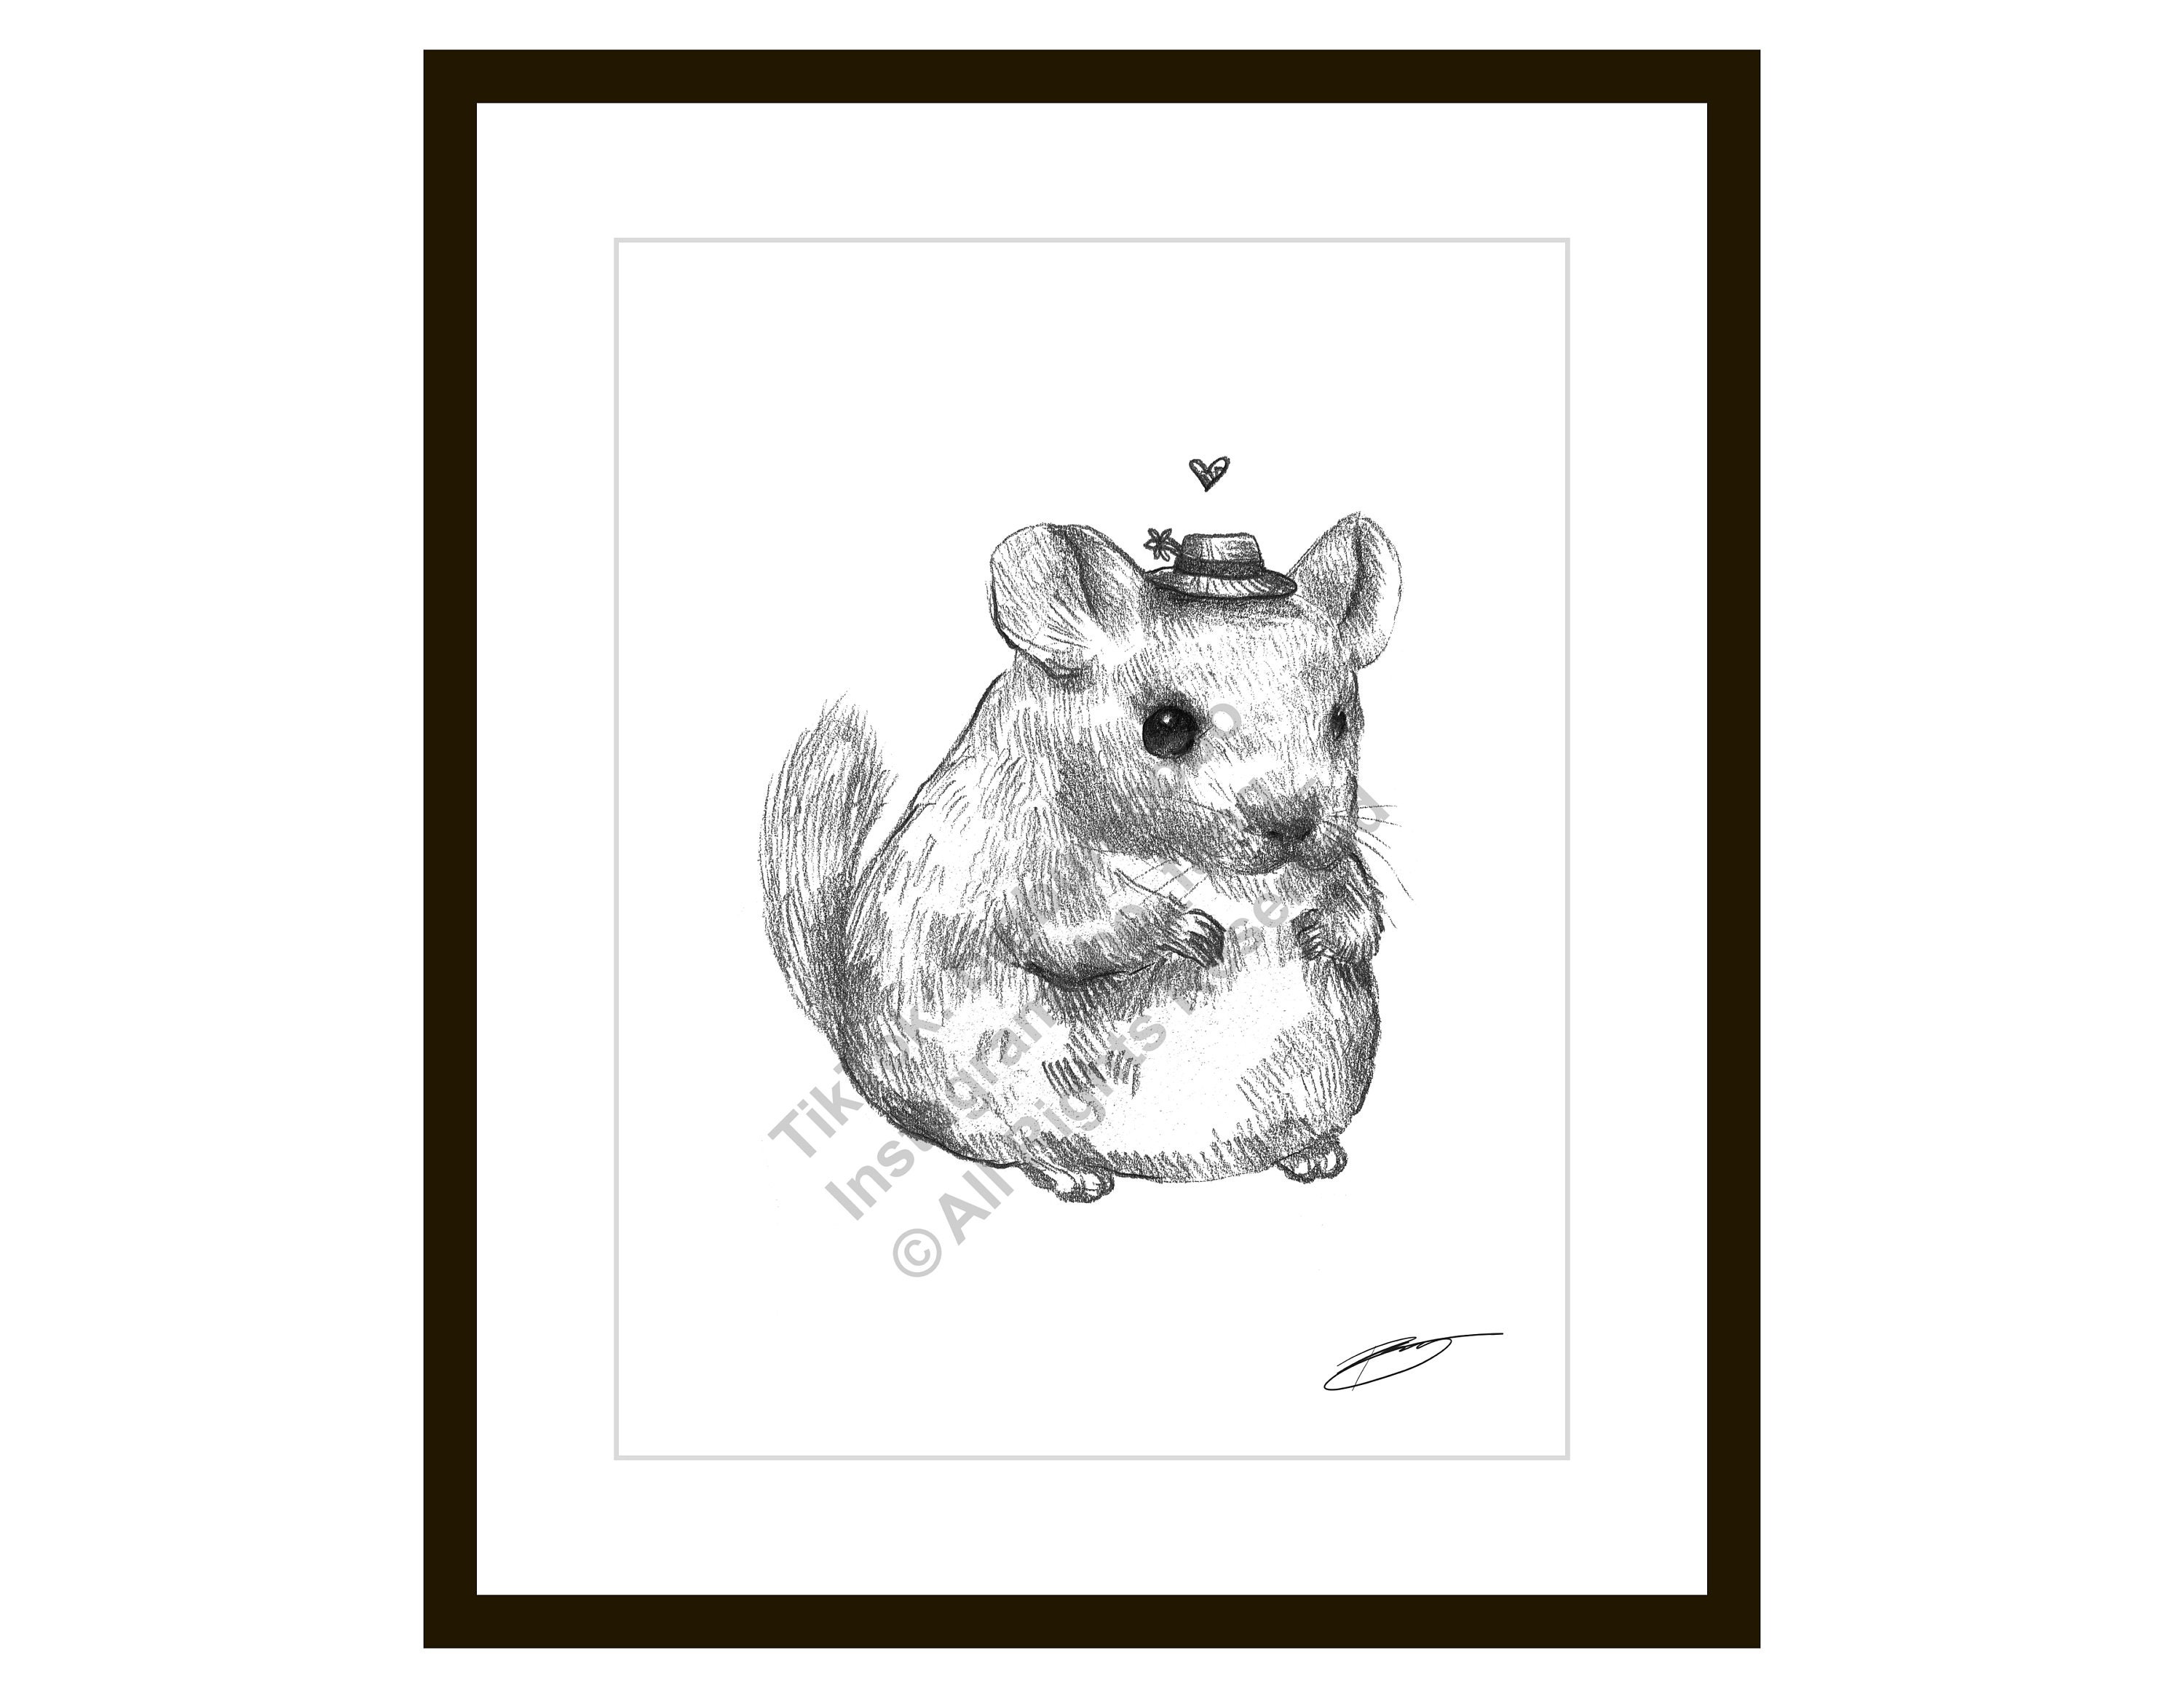 These Chinchillas Will Instantly Improve Your Day  Animal illustration  art Cute animal illustration Animal drawings